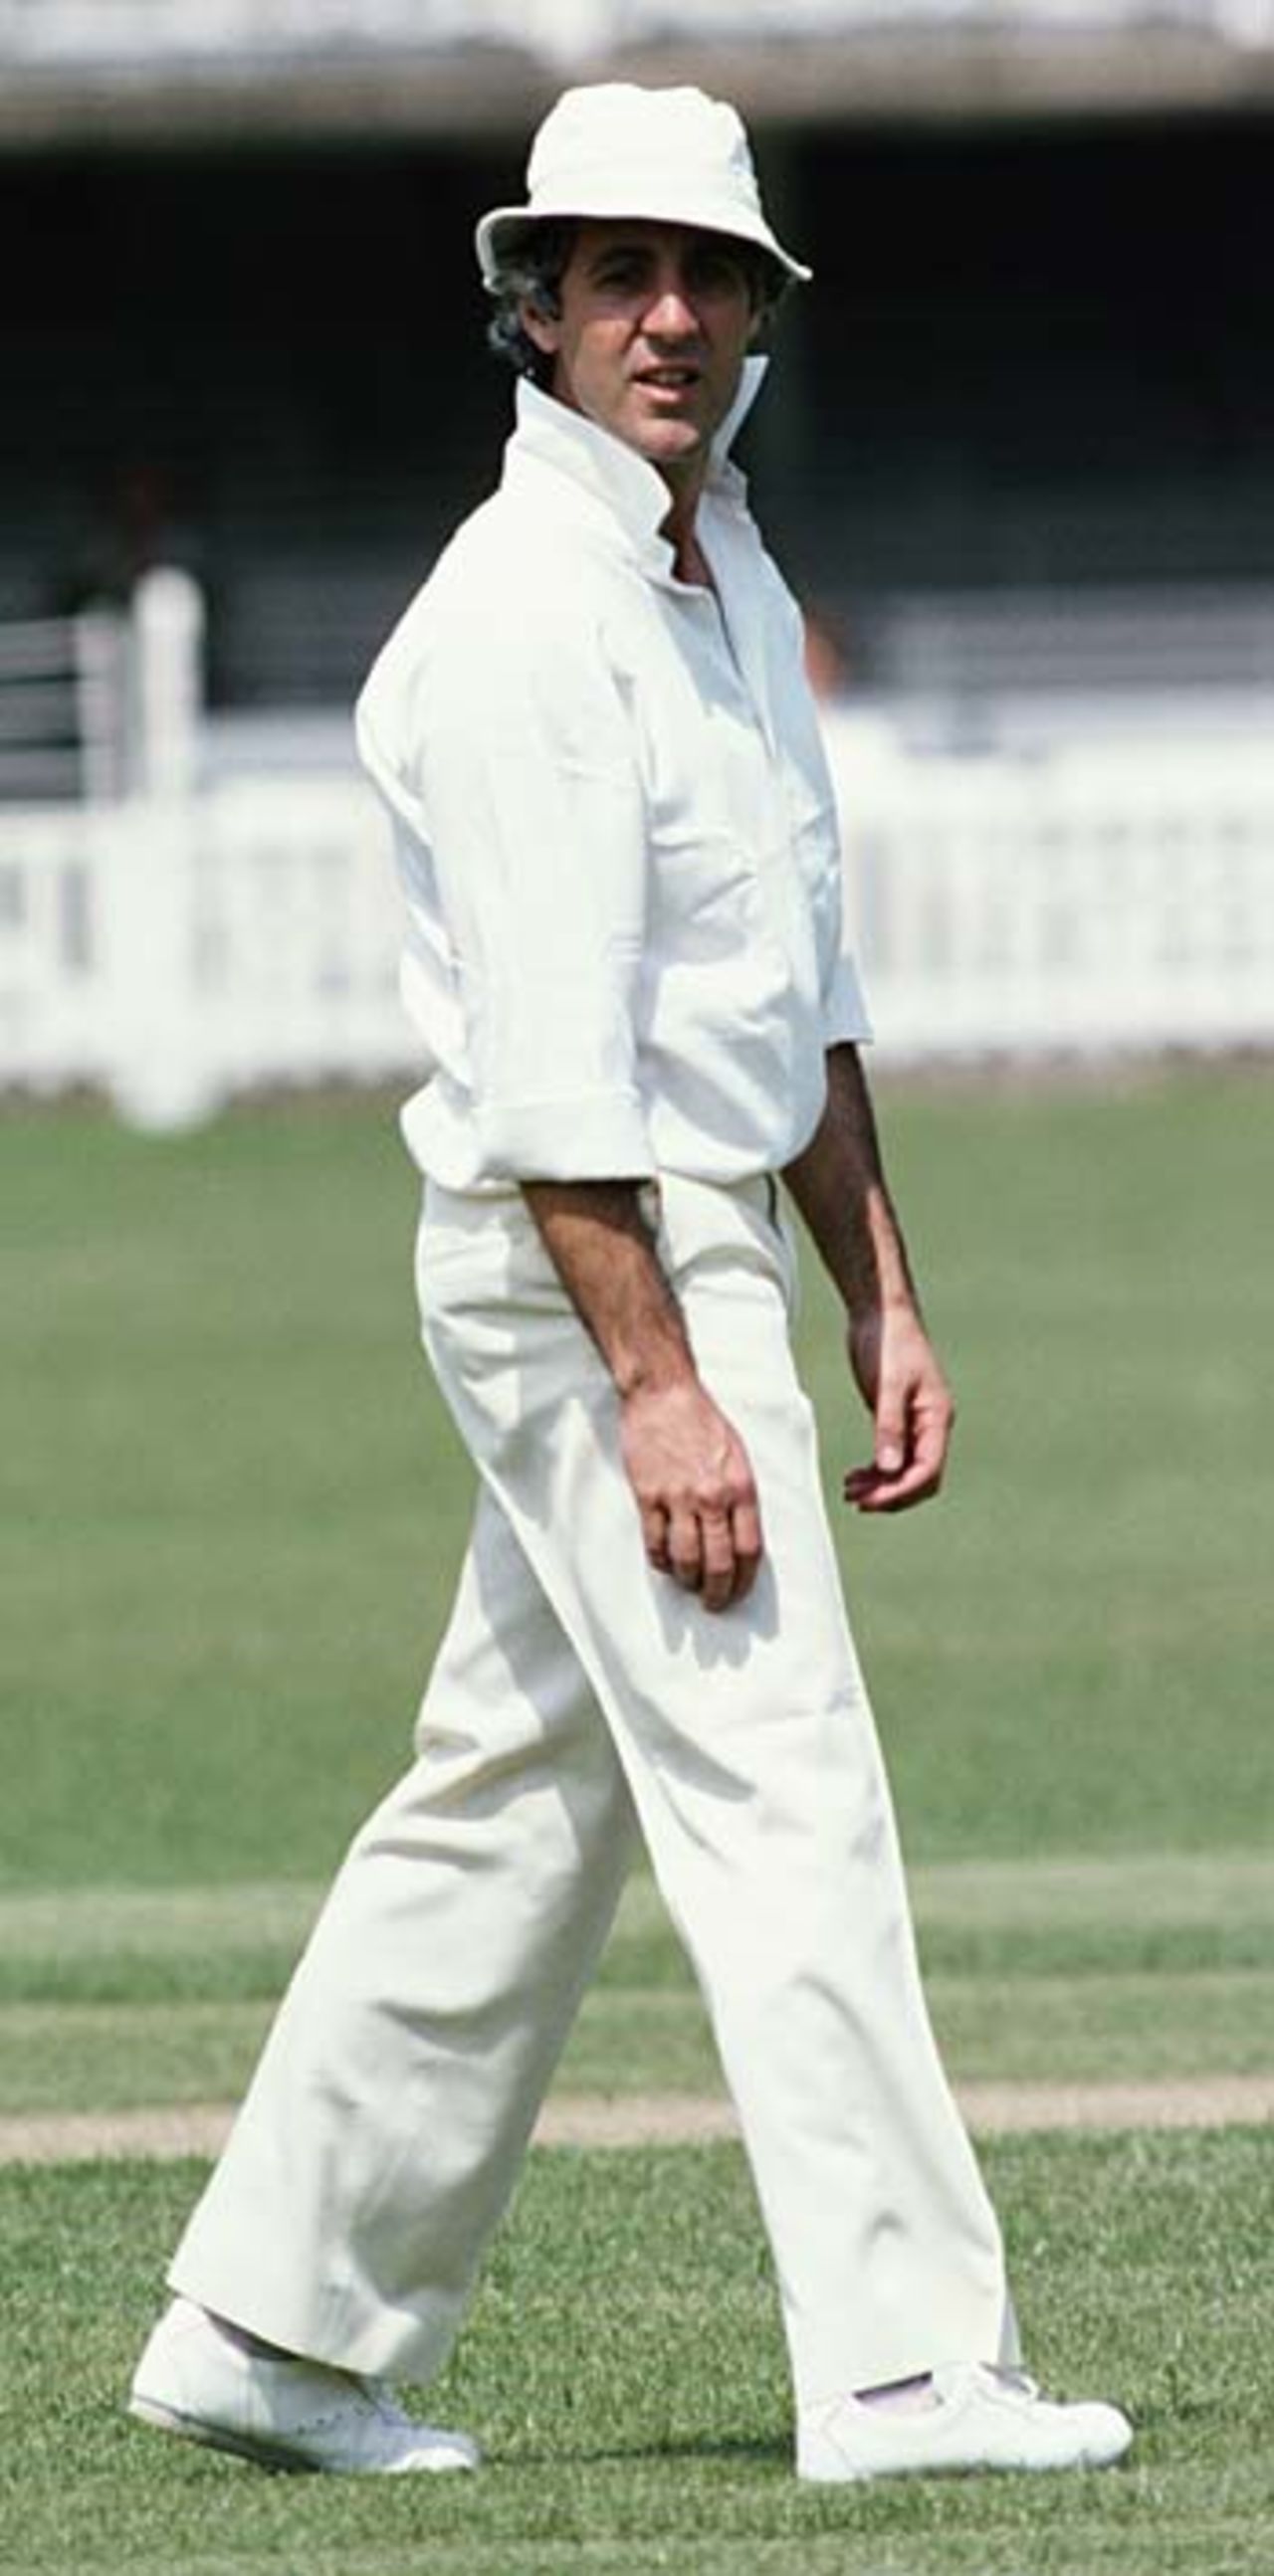 Mike Brearley in the field, Lord's, 1979